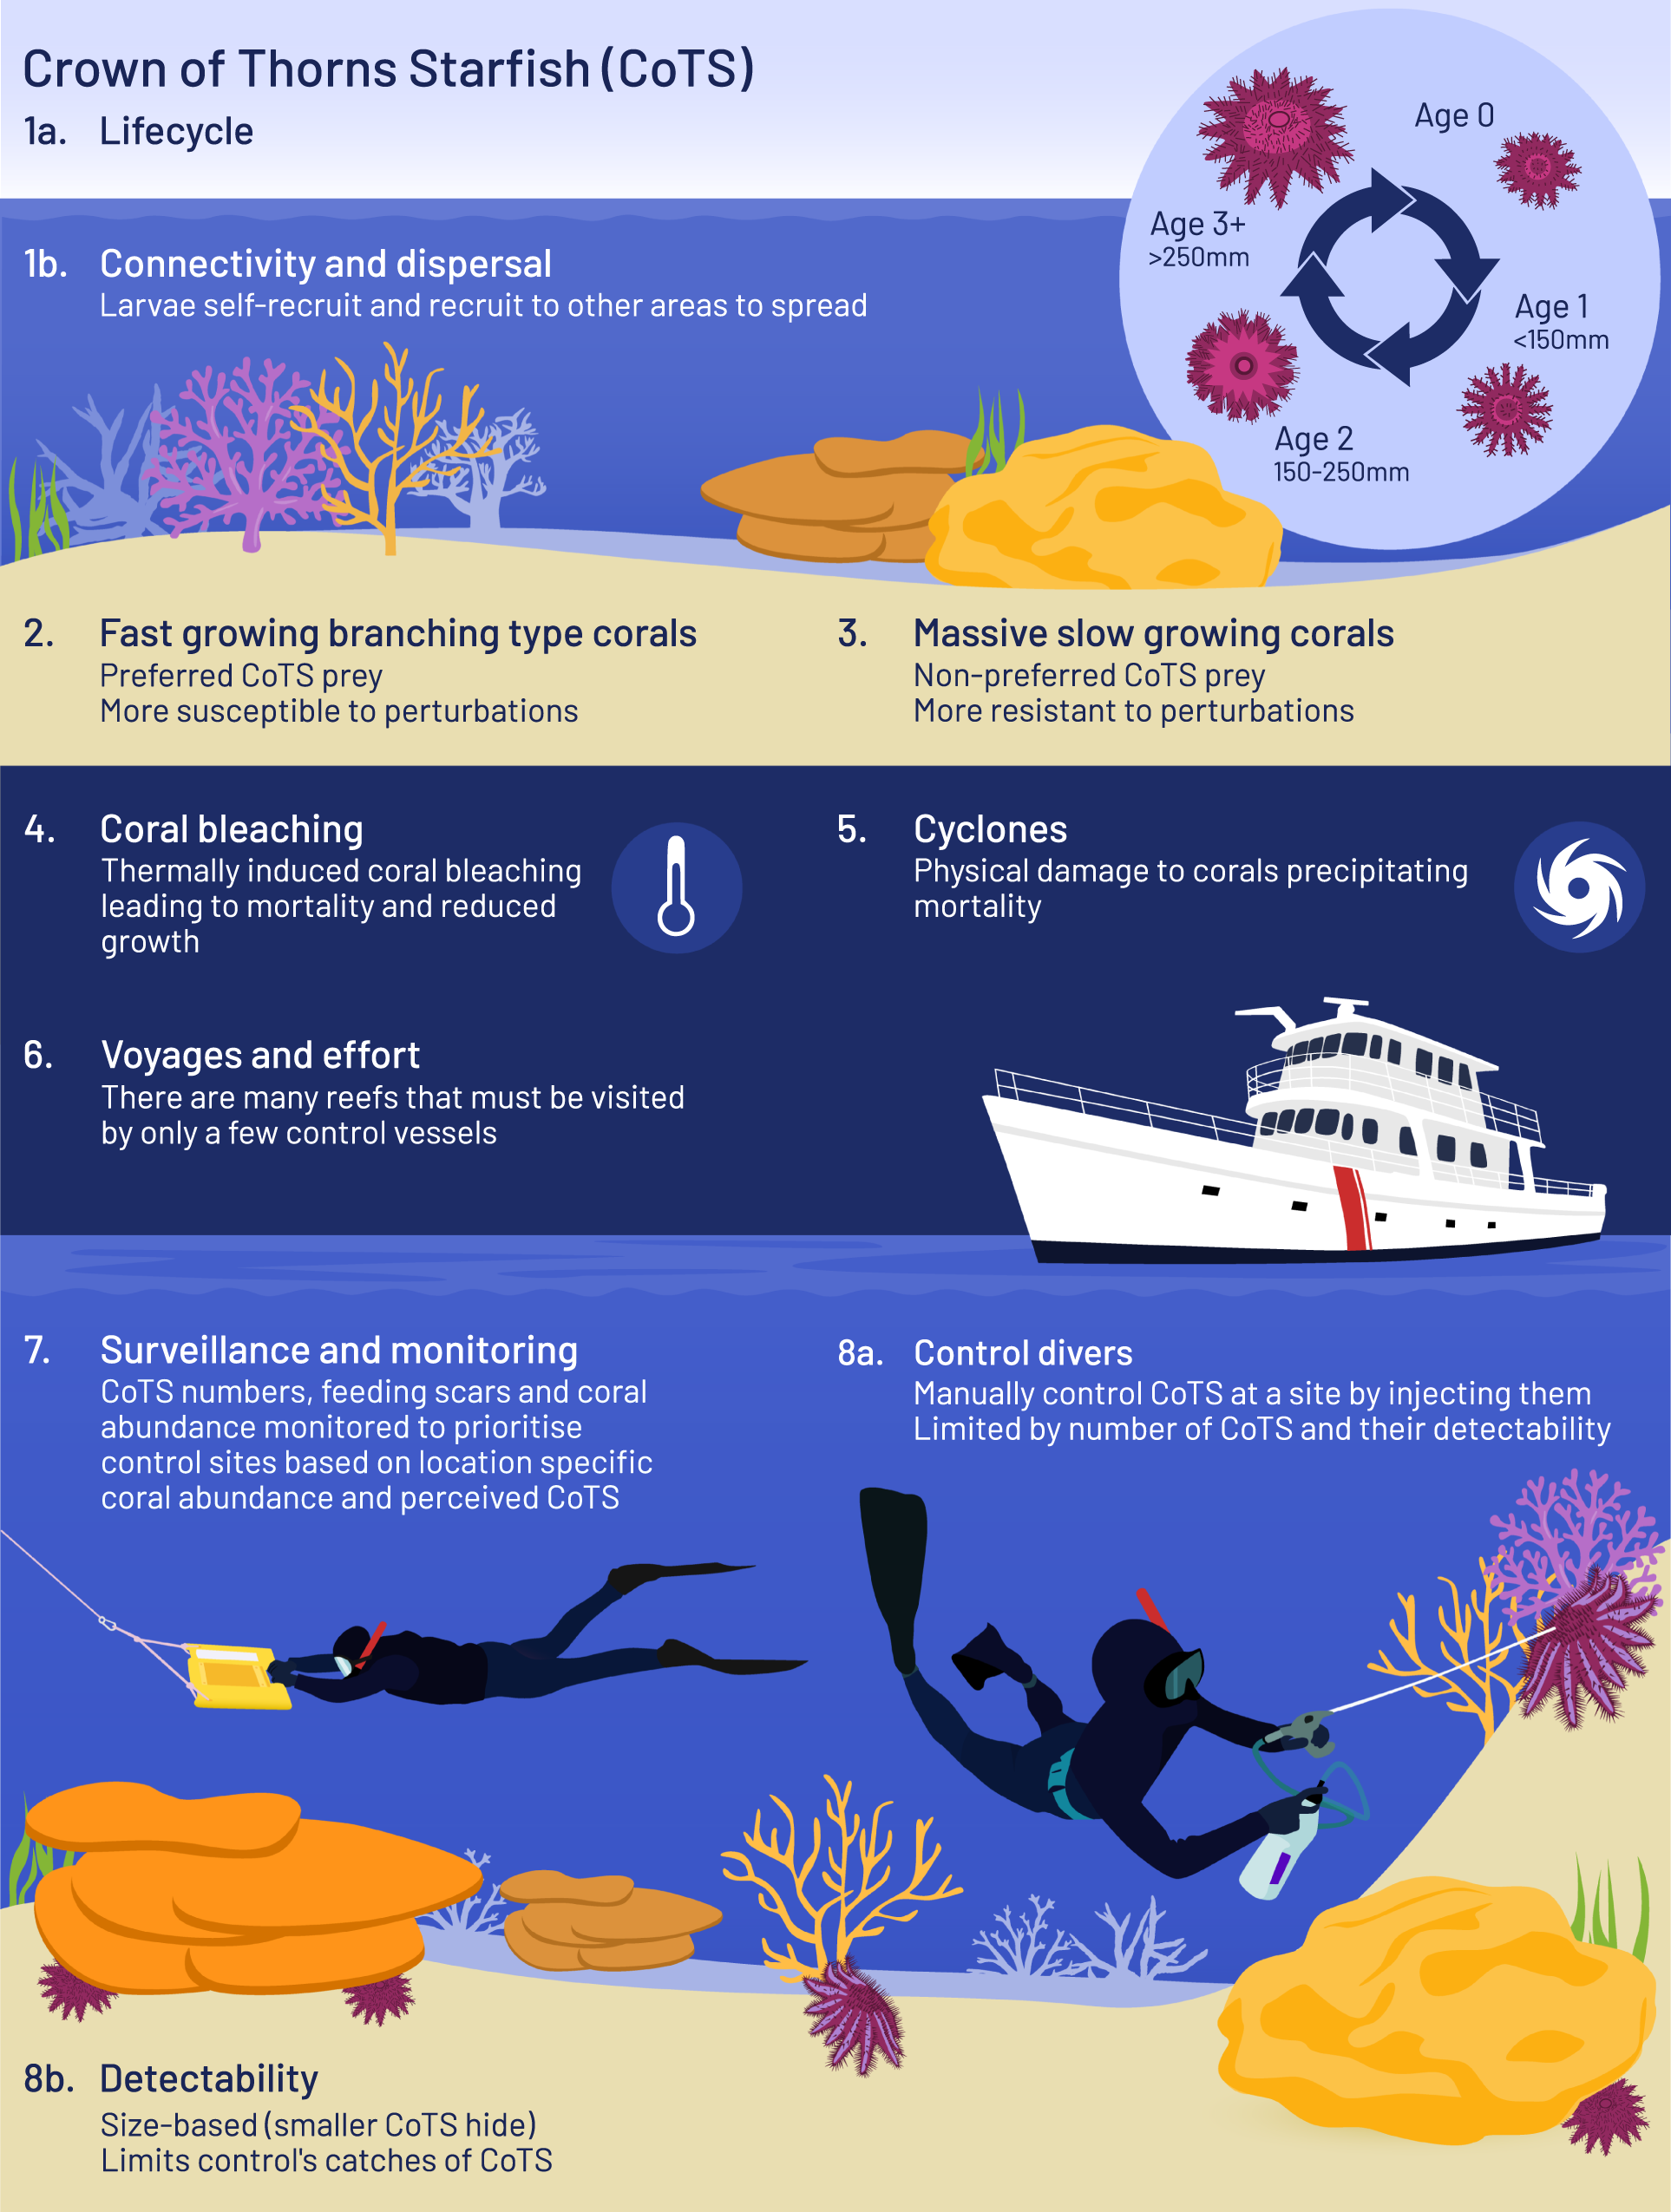 Culling corallivores improves short-term coral recovery under bleaching  scenarios